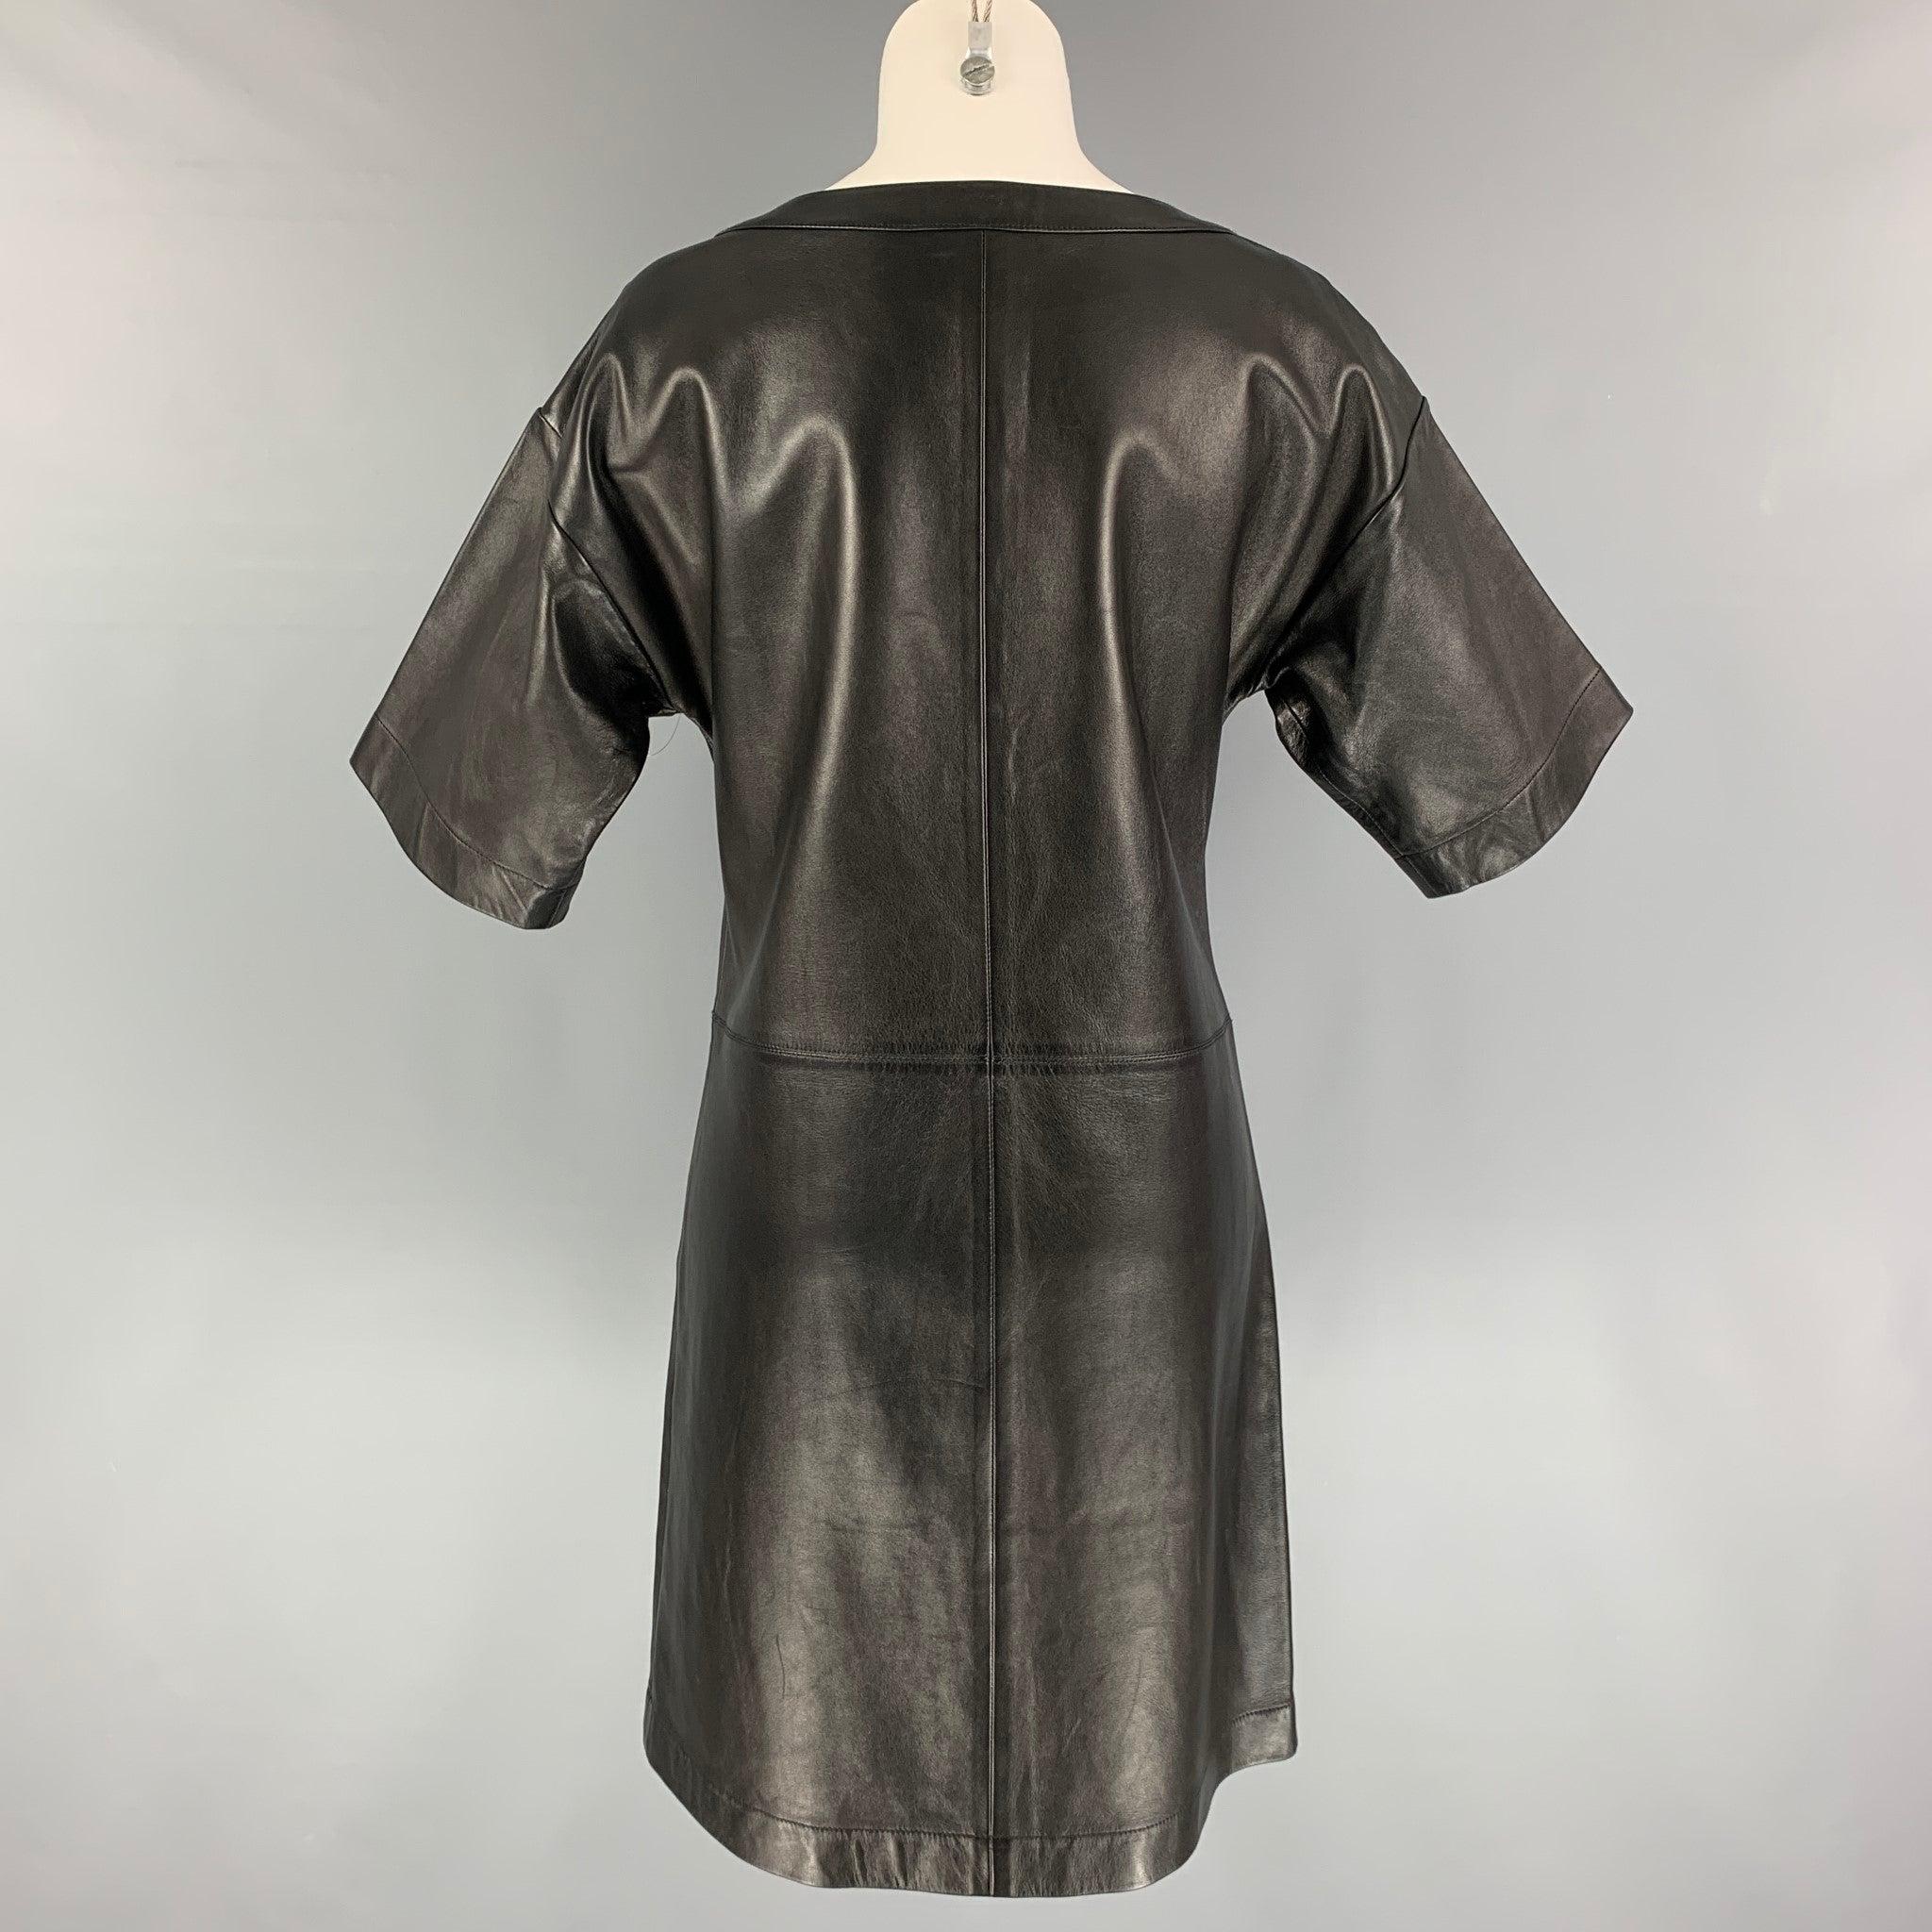 MICHAEL KORS Size 4 Black Leather Short Sleeve Below Knee Dress In Good Condition For Sale In San Francisco, CA